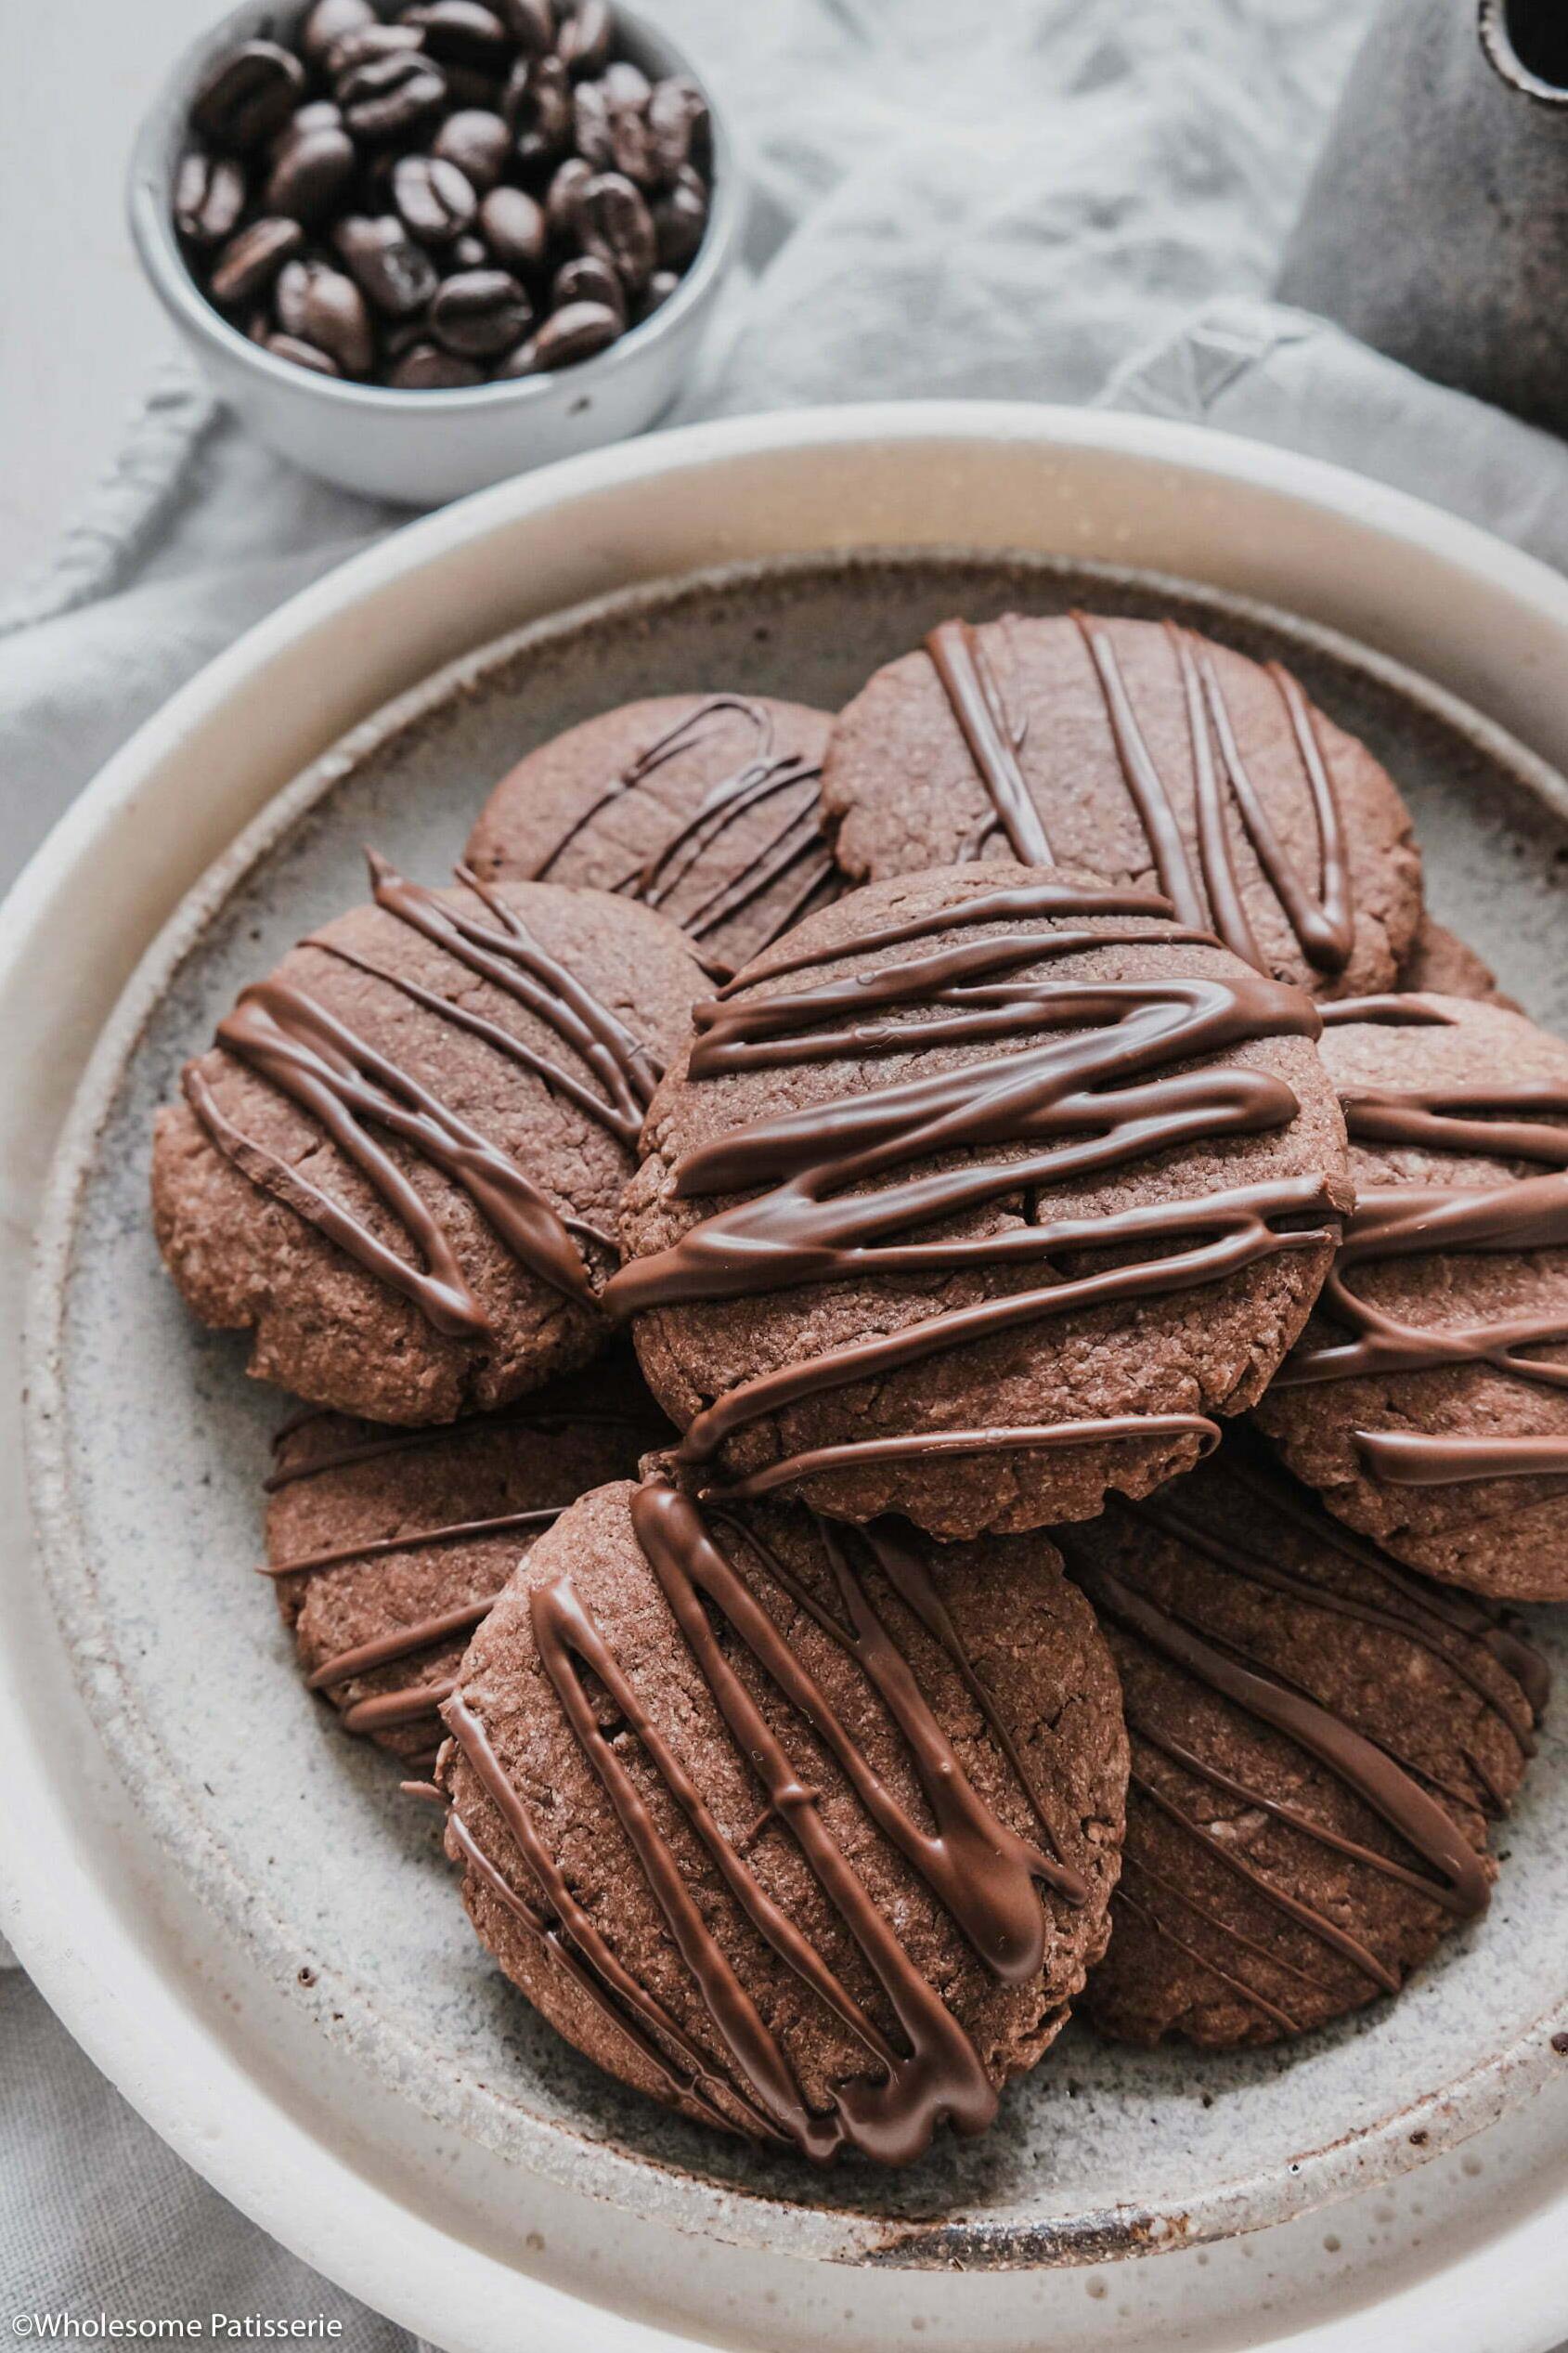  Sweeten up your day with these delicious mocha biscuits